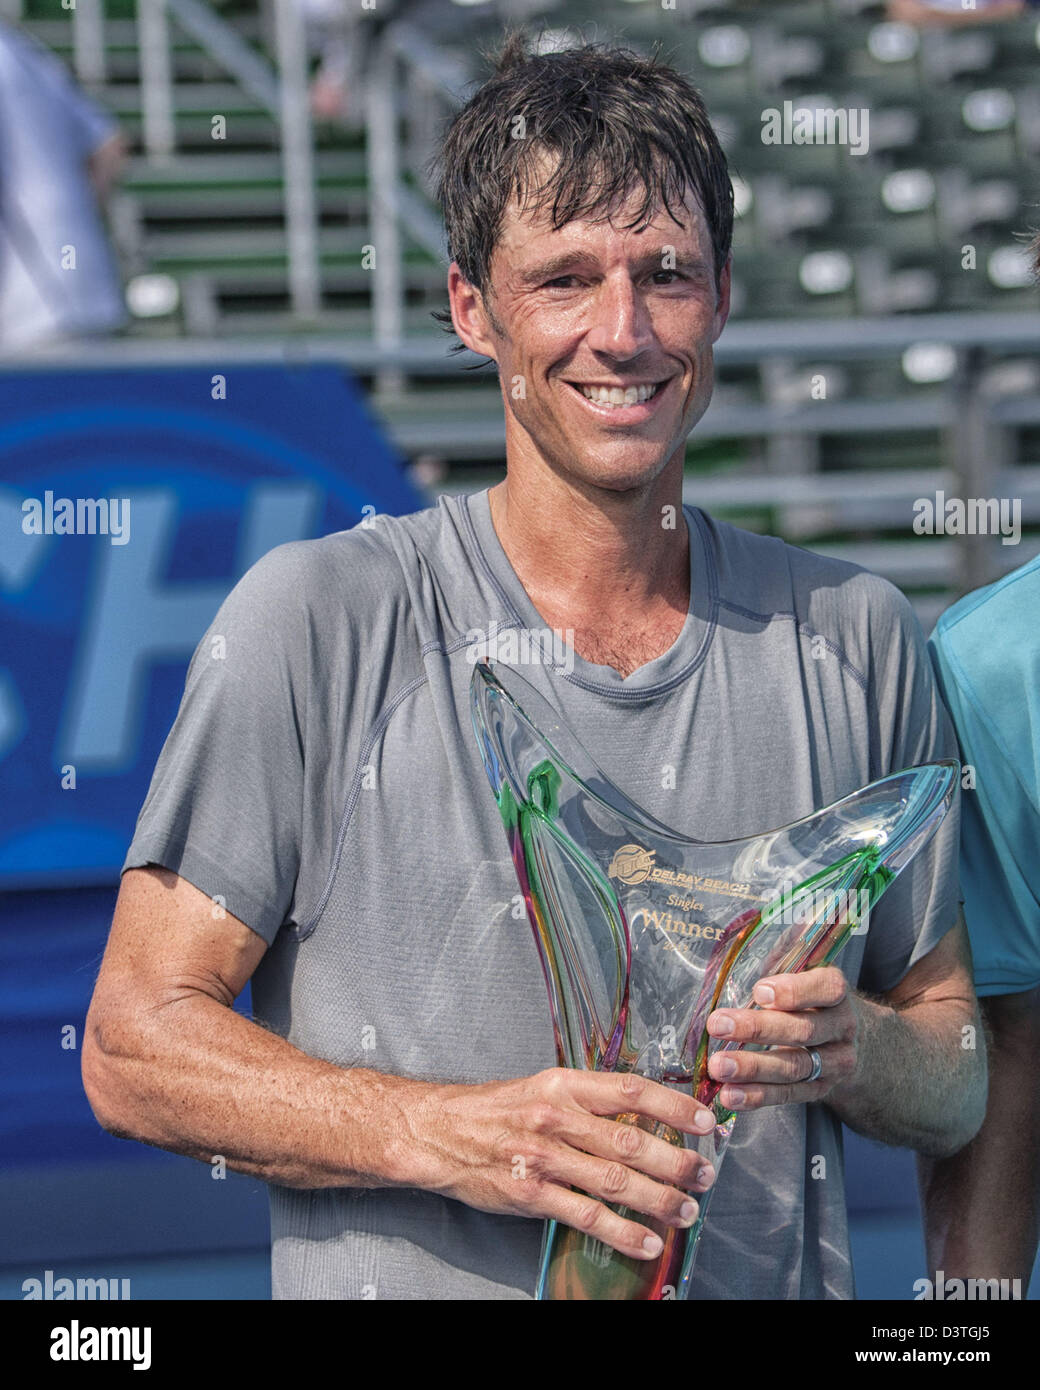 Delray Beach, Florida, USA. 24th February 2013.  Aaron Krickstein (USA) took home the third-place trophy, rallying from a first-set loss to defeat Mats Wilander (SWE) 4-6, 7-5 (10-5). Krickstein, who runs a tennis academy in nearby Boca Raton, won two of his three matches during the three-day event and improved his record to 7-6 at the Delray Beach ITC. The International Tennis Championships is an ATP World Tour 250 series men's tennis tournament held every year in Delray Beach, Florida. (Credit Image: Credit:  Arnold Drapkin/ZUMAPRESS.com/Alamy Live News) Stock Photo